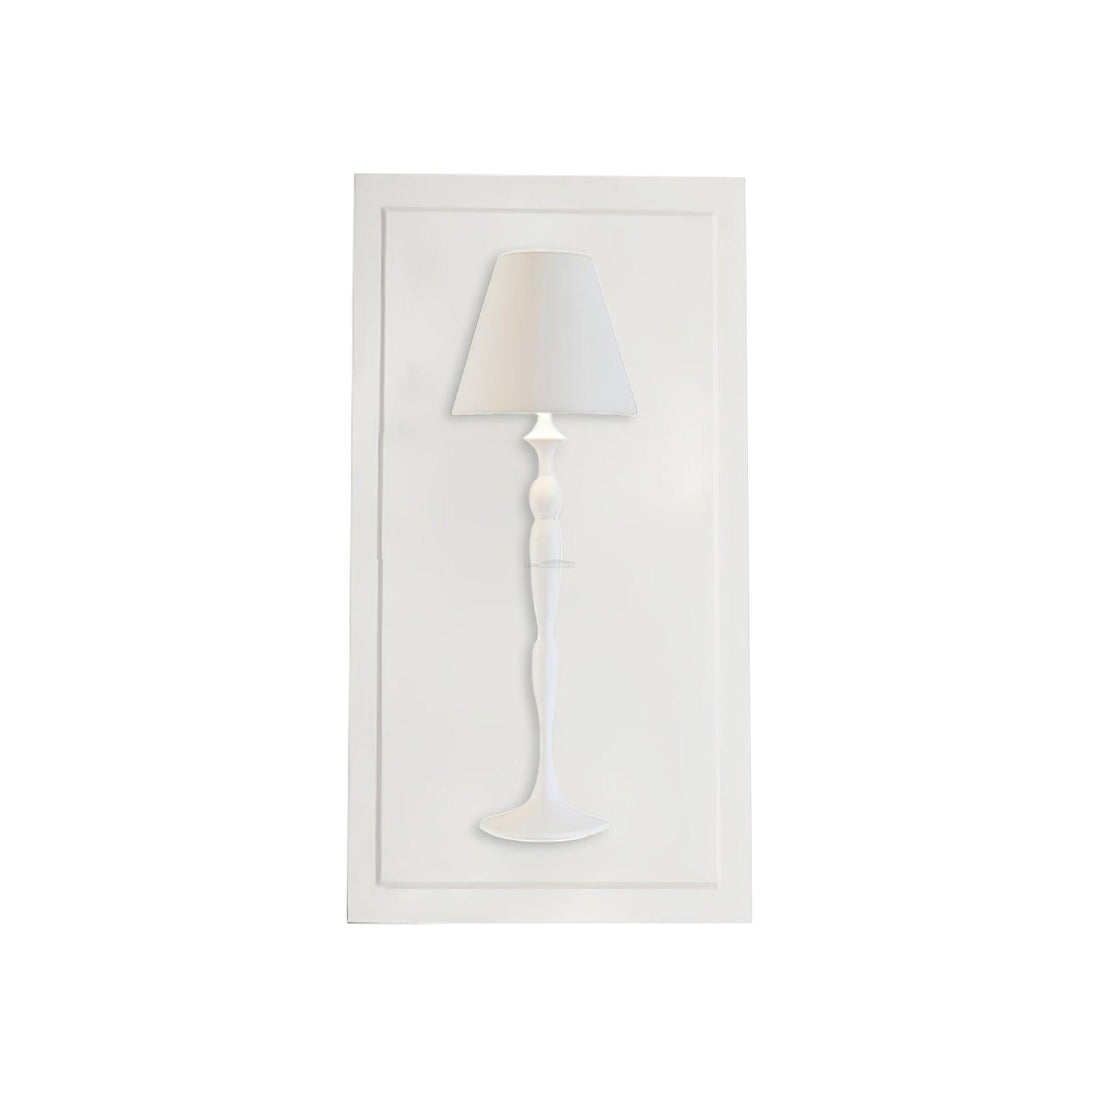 Plaster Picture Wall Sconce